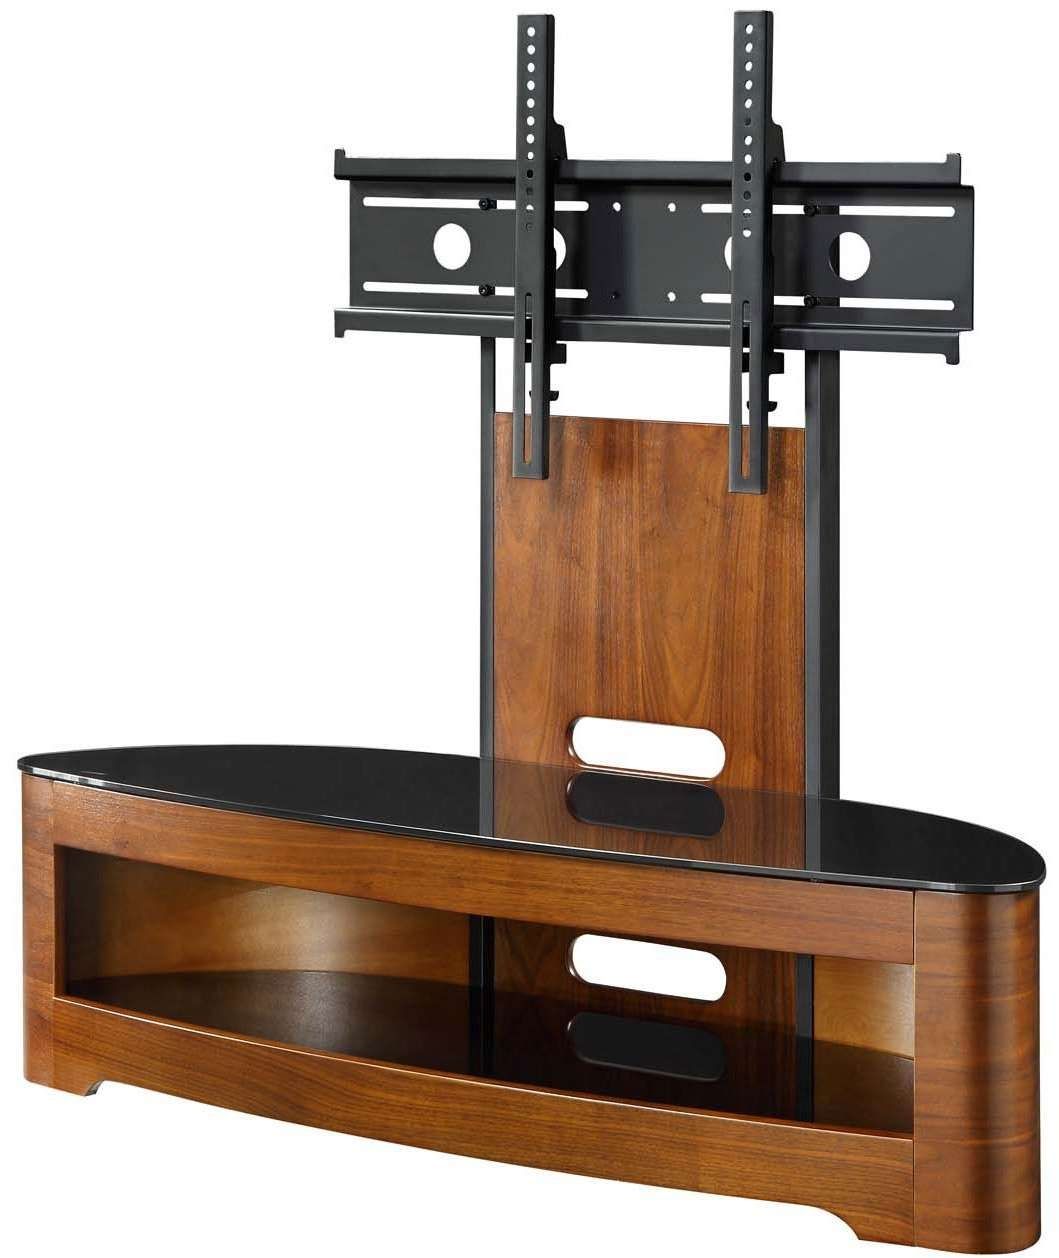 Jual Jf209 Wb Tv Stands Throughout Dark Walnut Tv Stands (View 10 of 15)